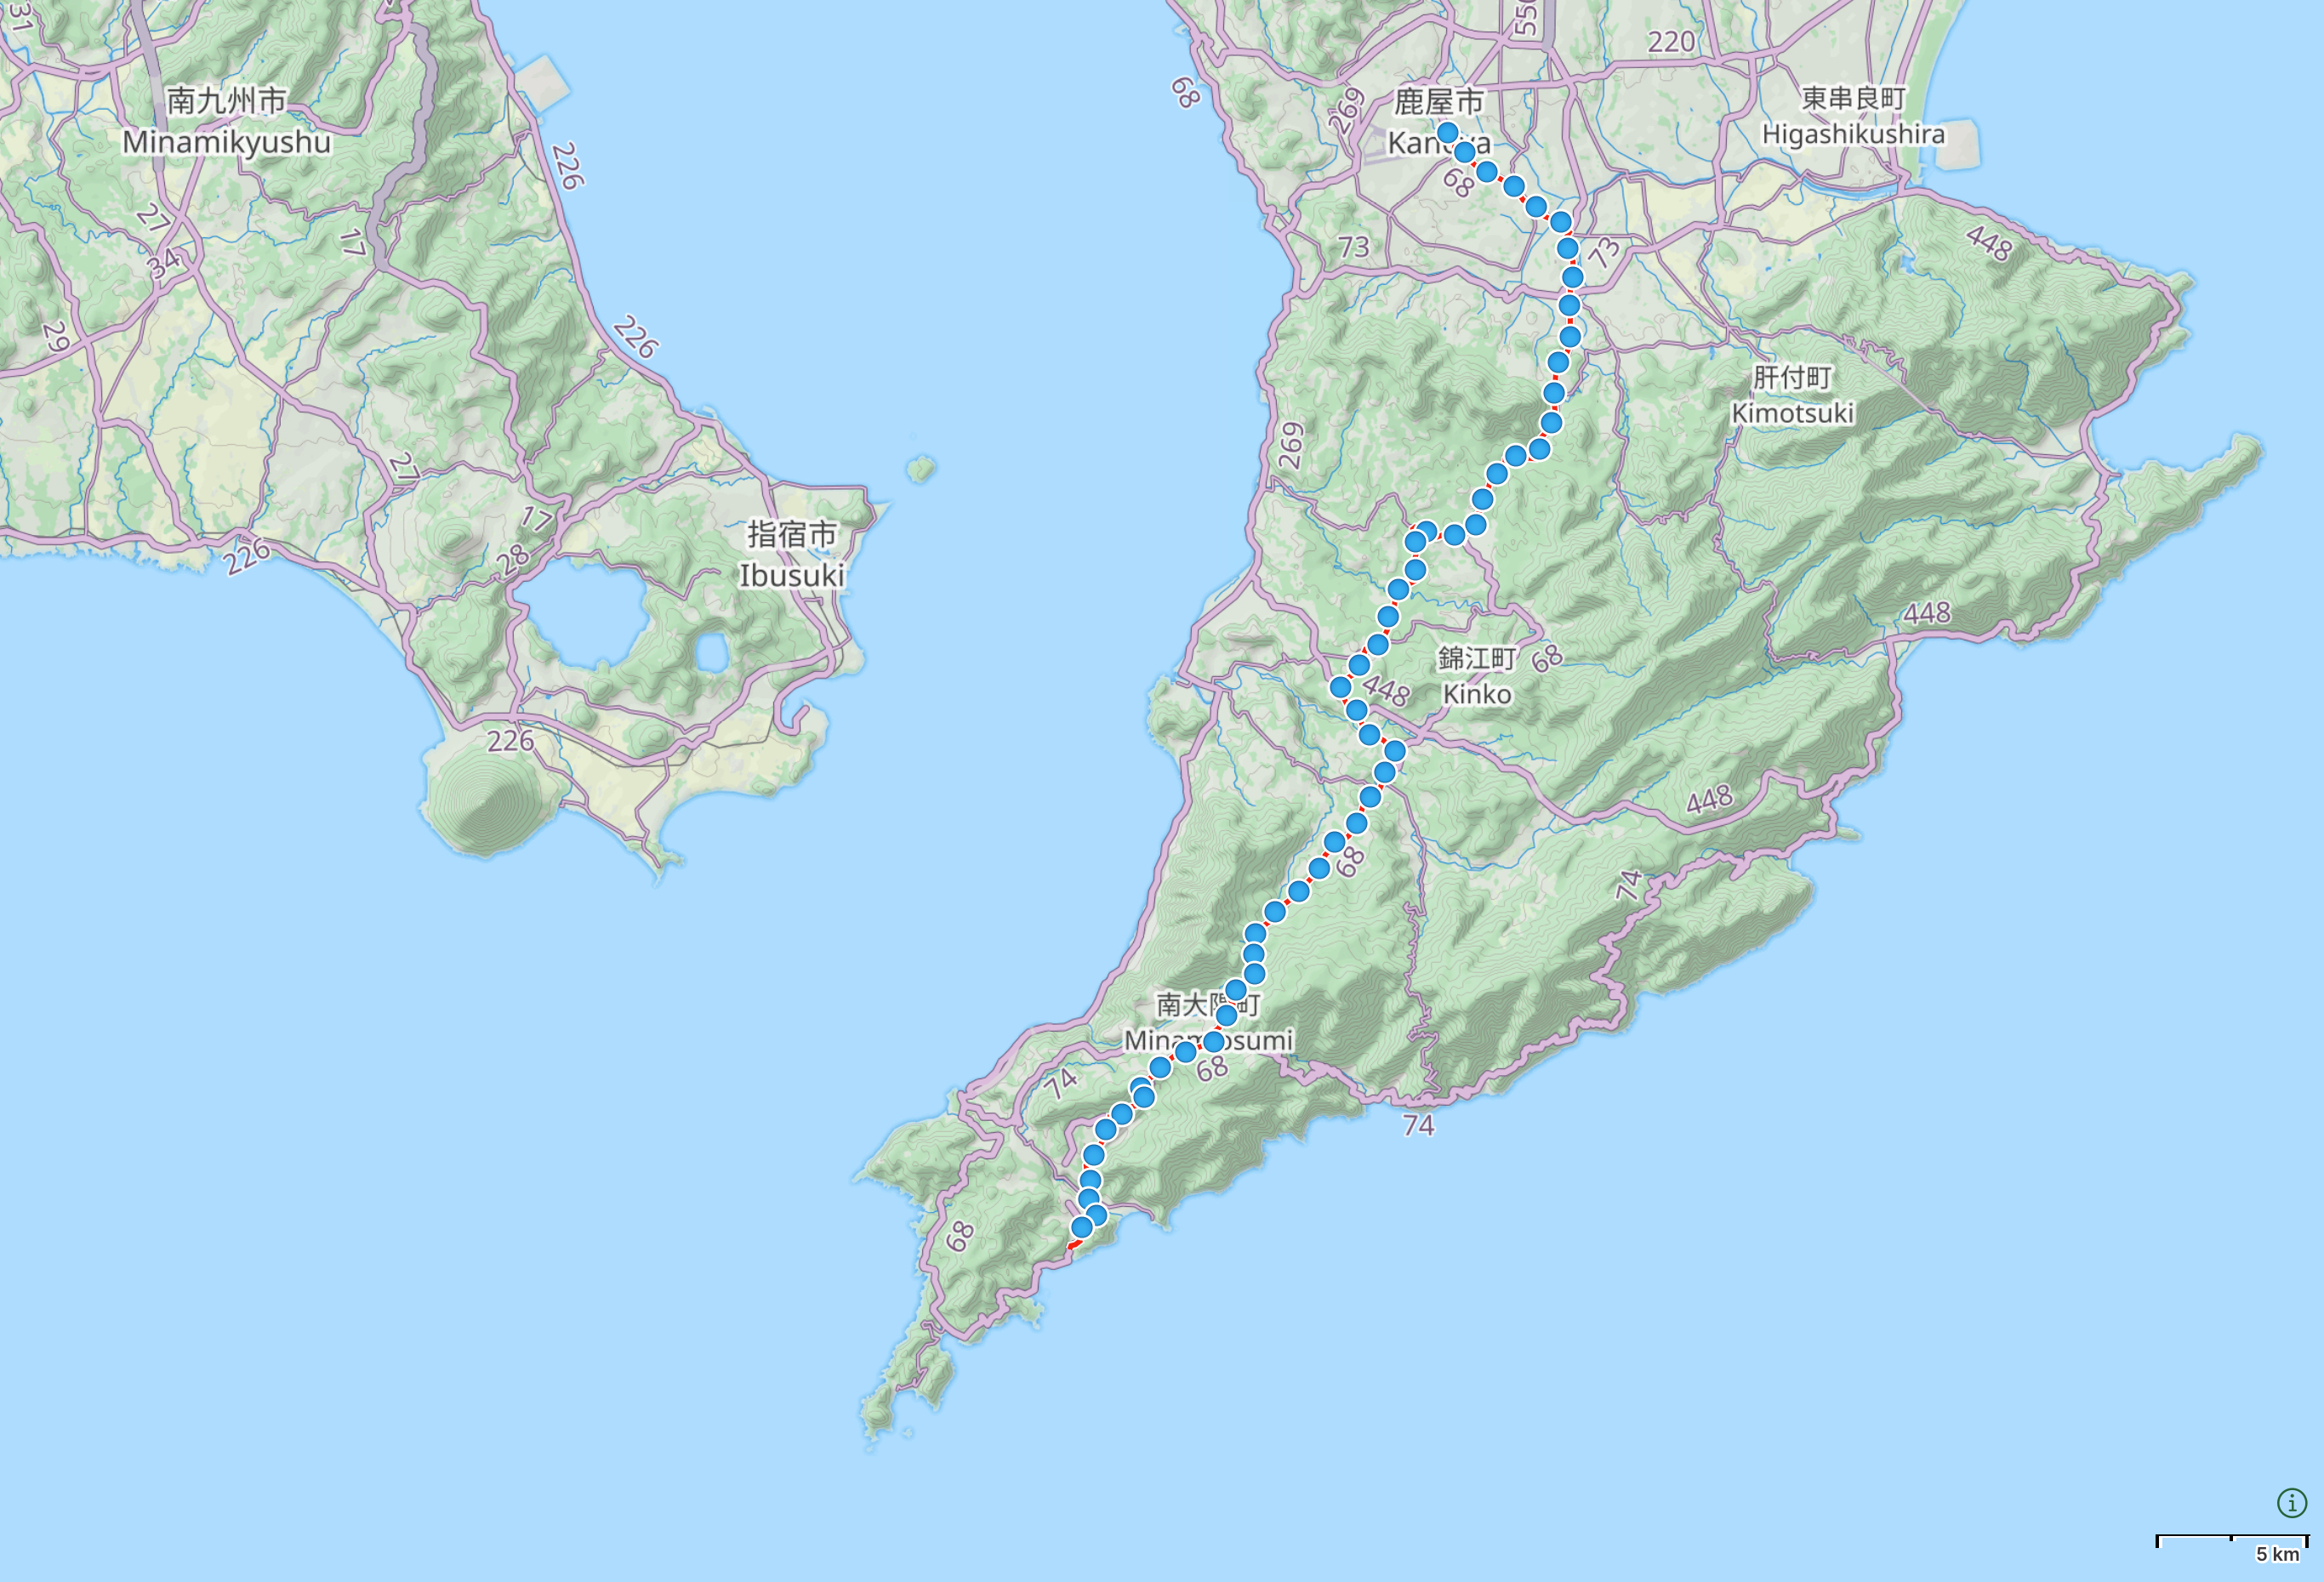 Map of Kagoshima Prefecture with author’s route from Satakori to Kanoya highlighted.